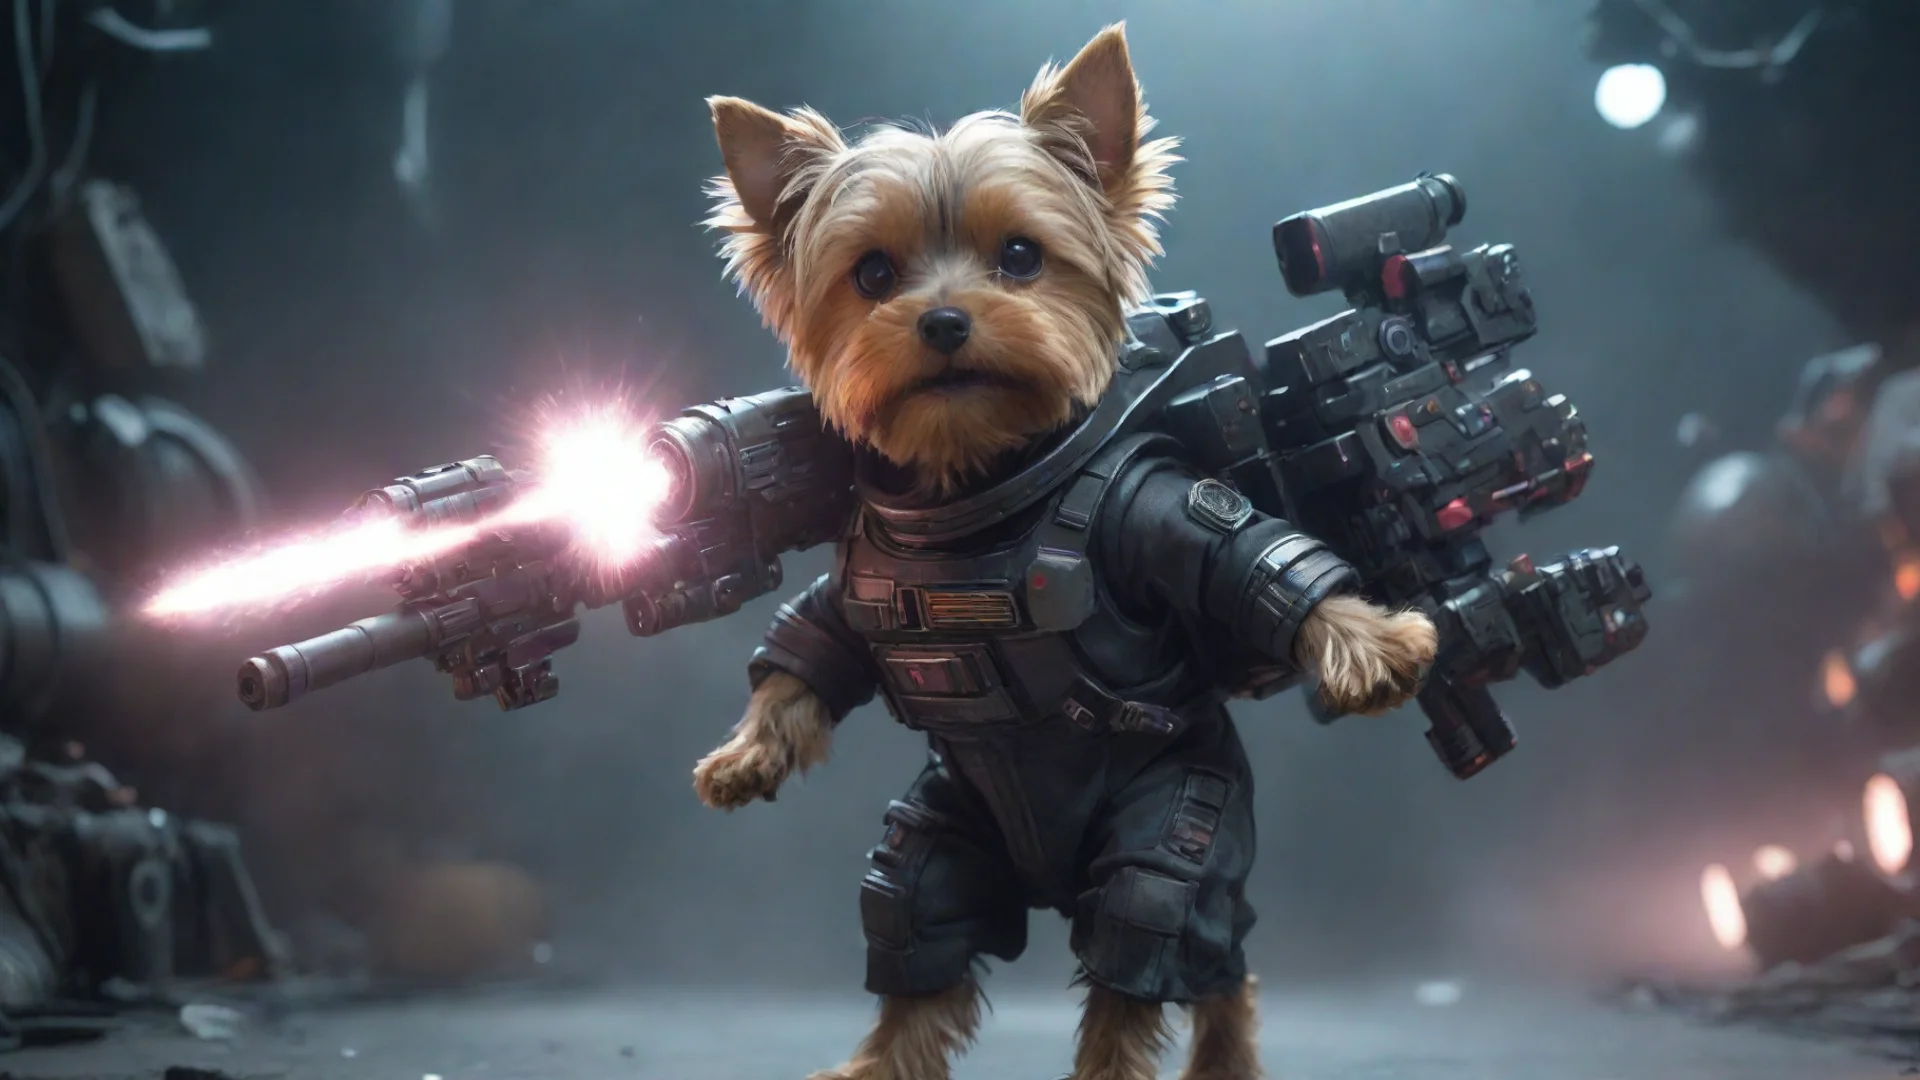 aiamazing aione yorkshire terrier in a cyberpunk space suit firing big weapon lot lighting awesome portrait 2 wide